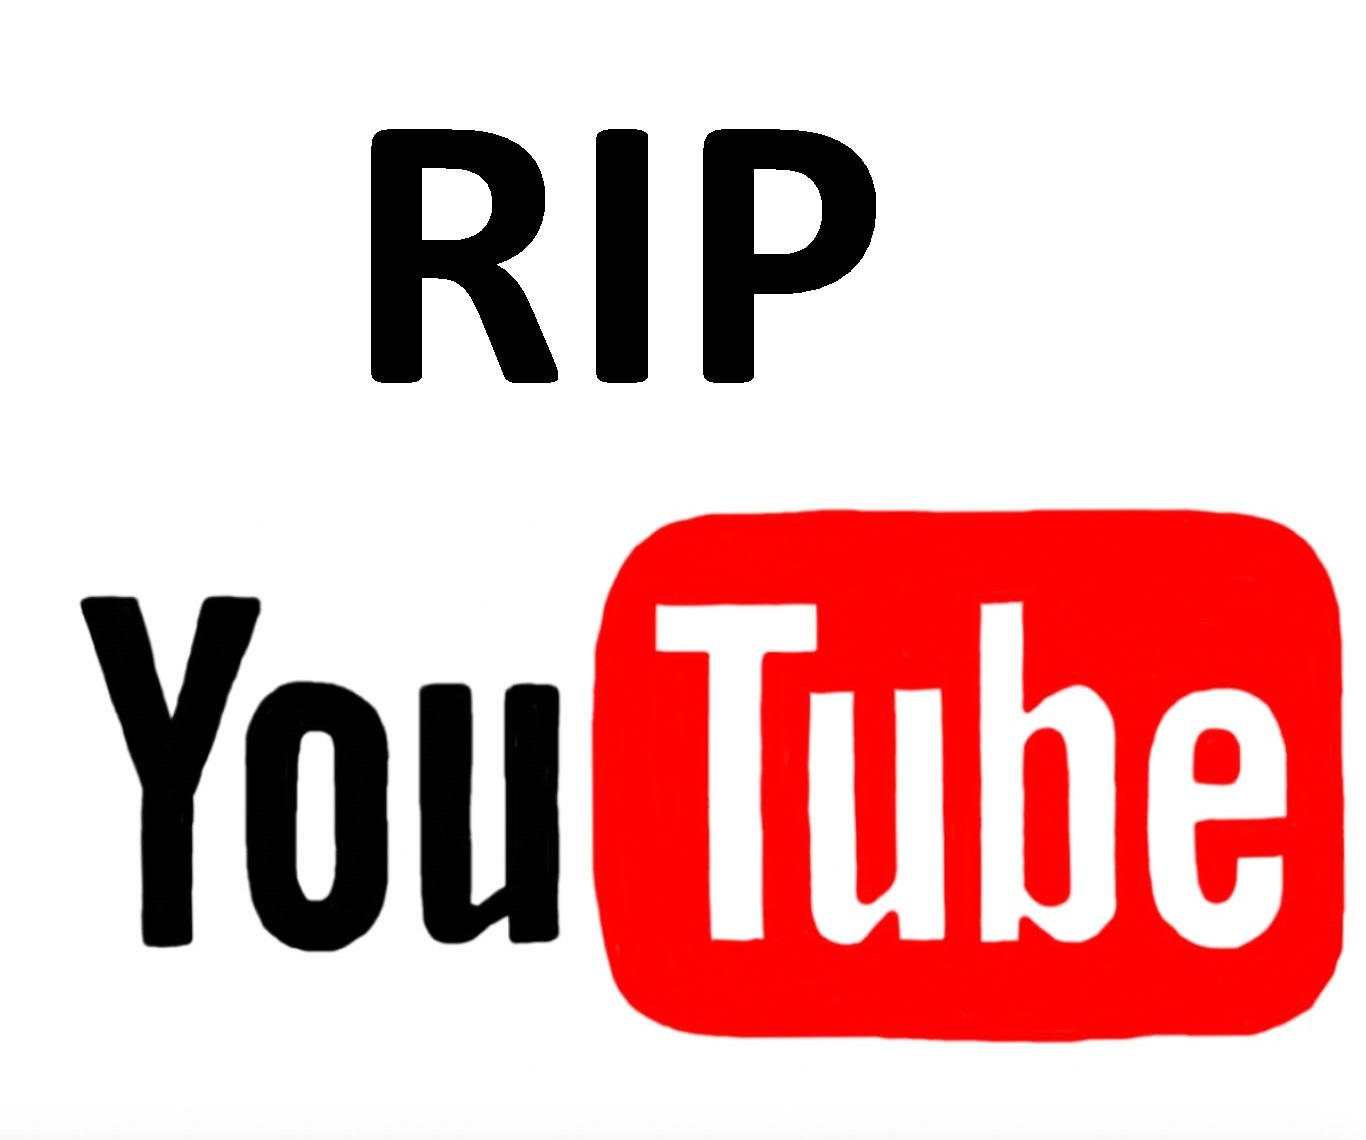 Youtube.com Old Logo - Only '90s kids will remember the old YouTube logo : funny